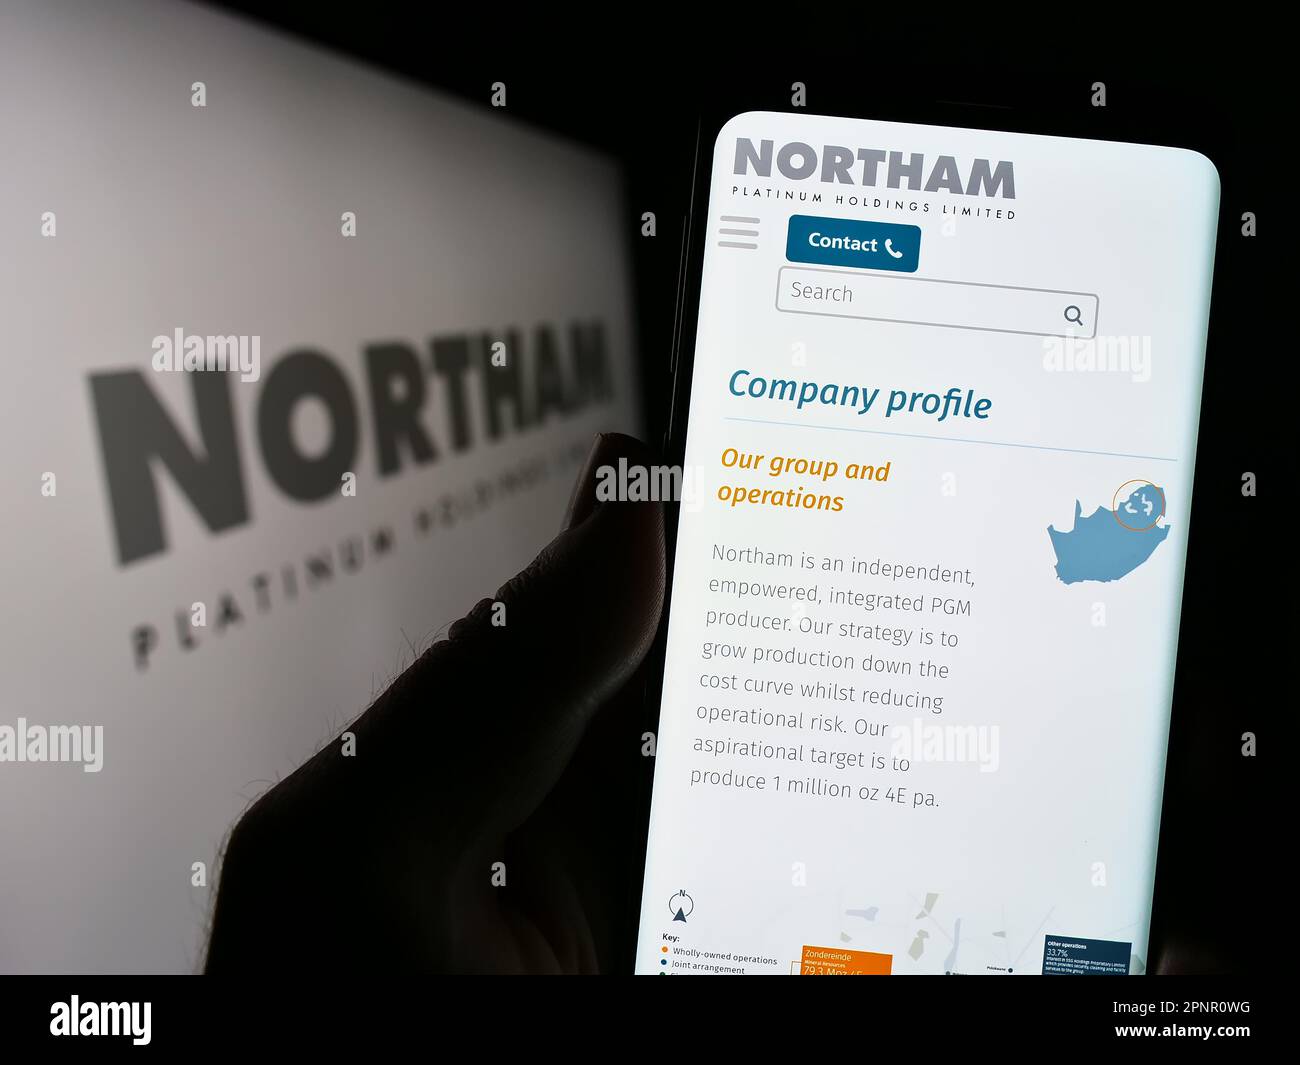 Person holding cellphone with website of company Northam Platinum Holdings Limited on screen in front of logo. Focus on center of phone display. Stock Photo